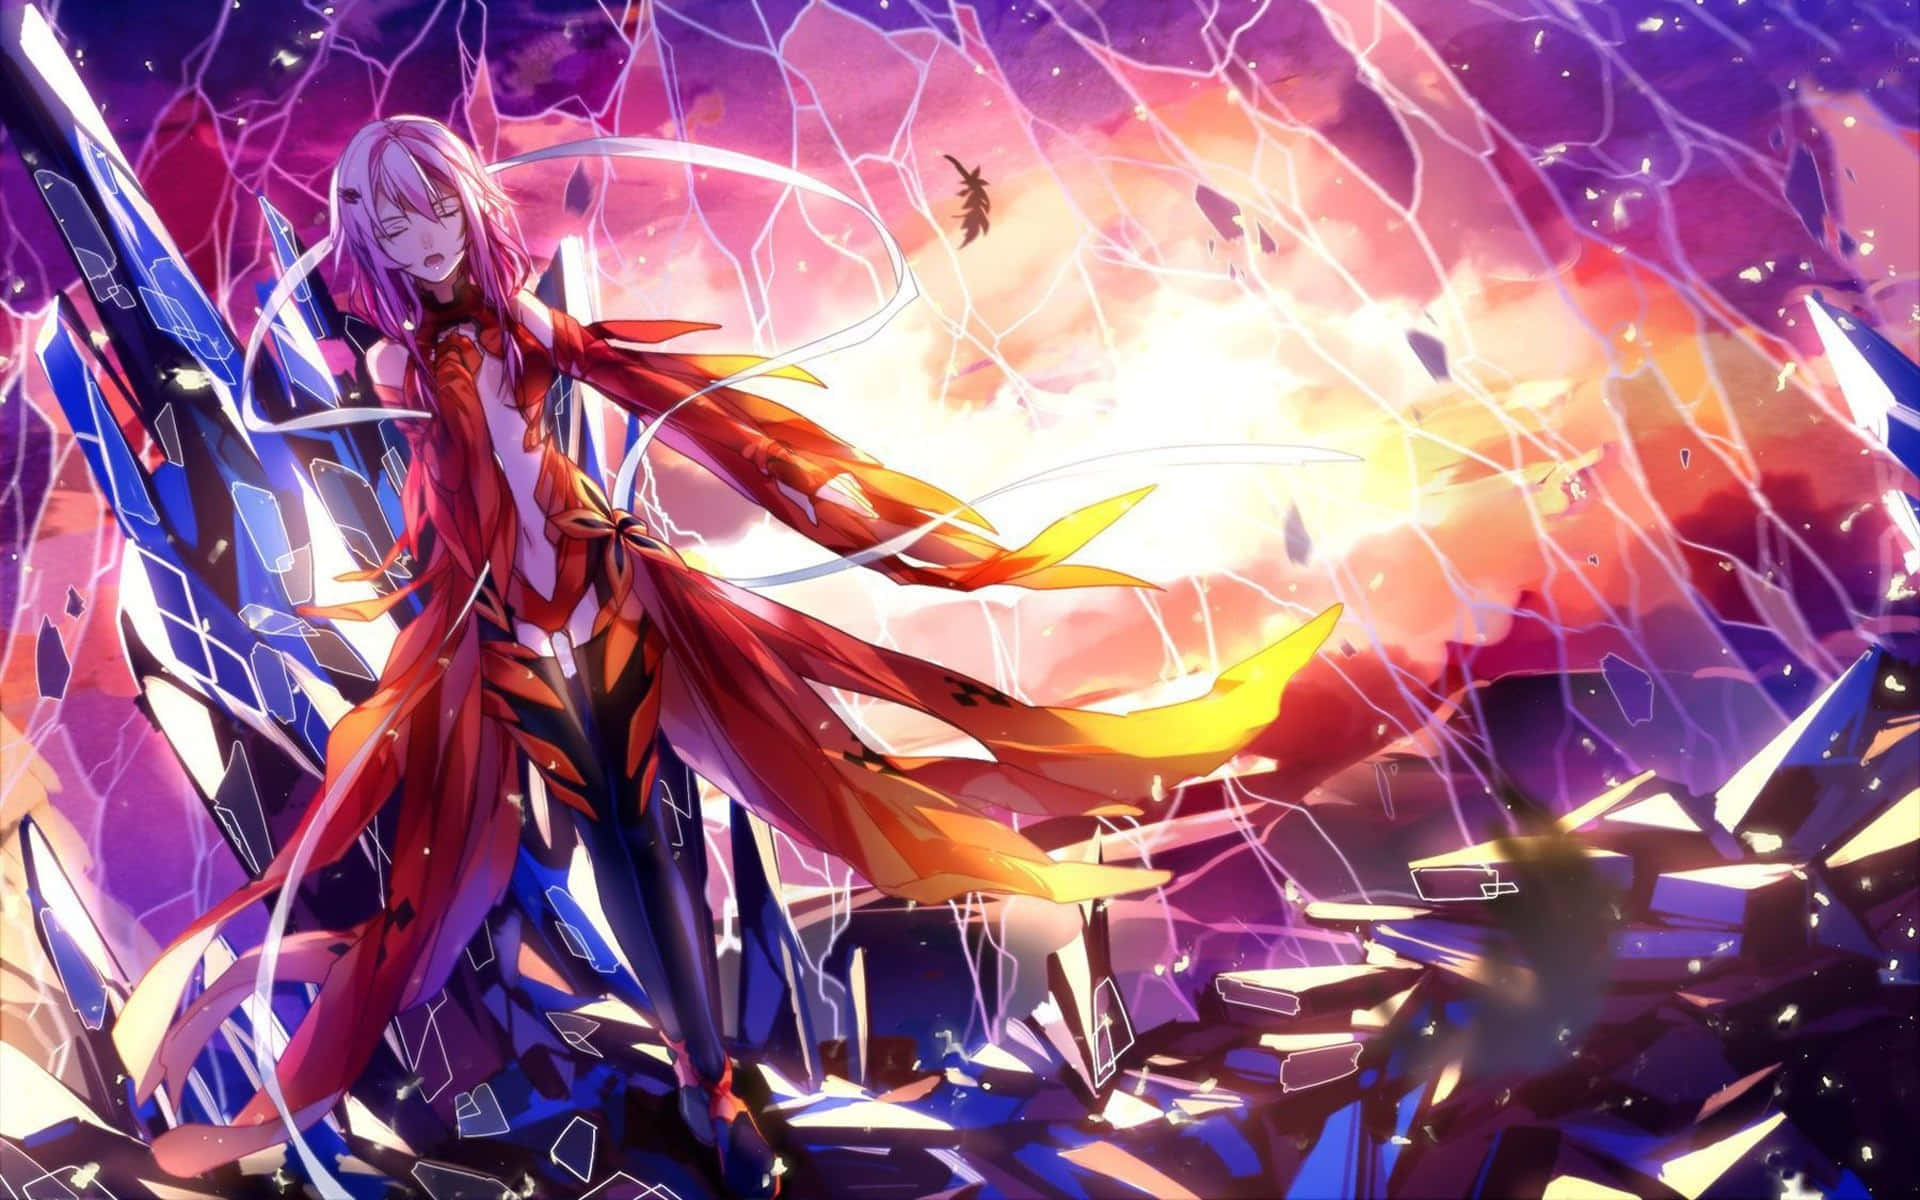 A beautiful wallscape depicting the fantastical world of Guilty Crown